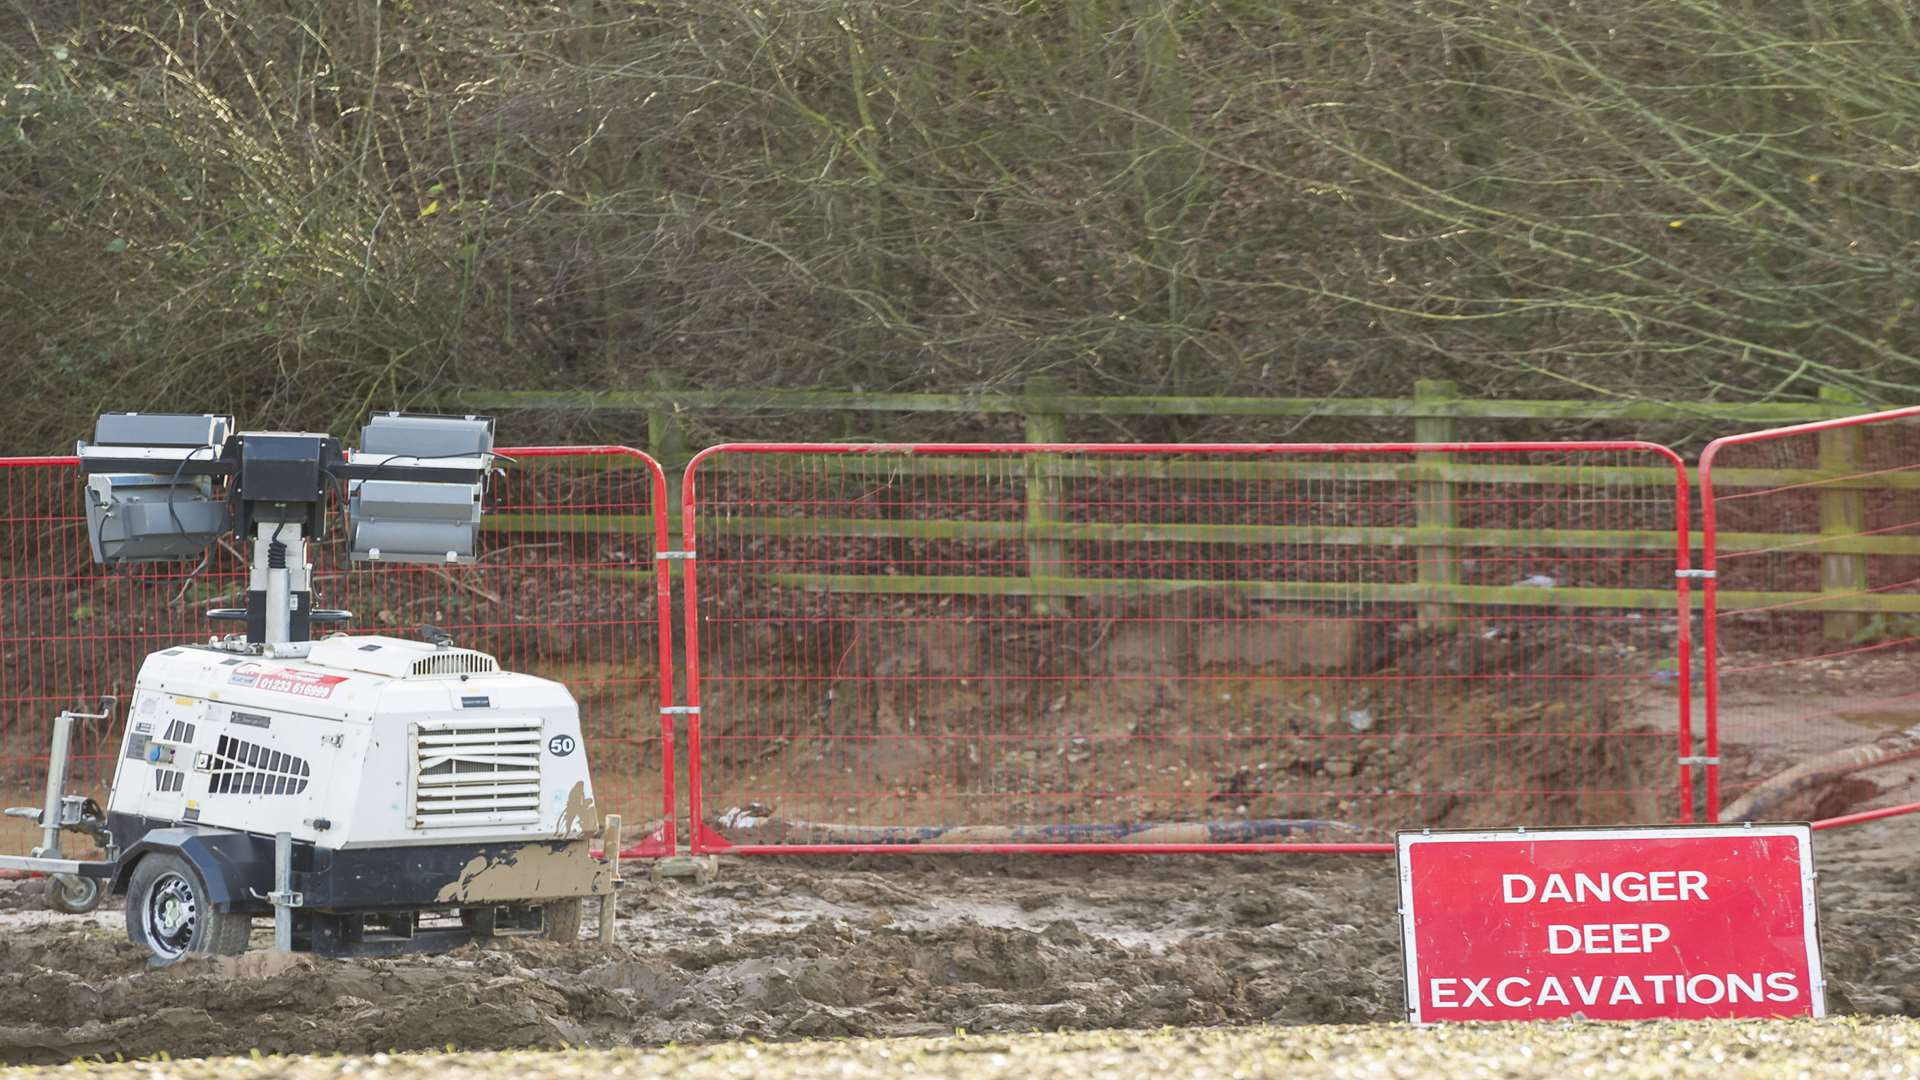 Machinery in the field where Southern Water's contractor is working to fix the burst main